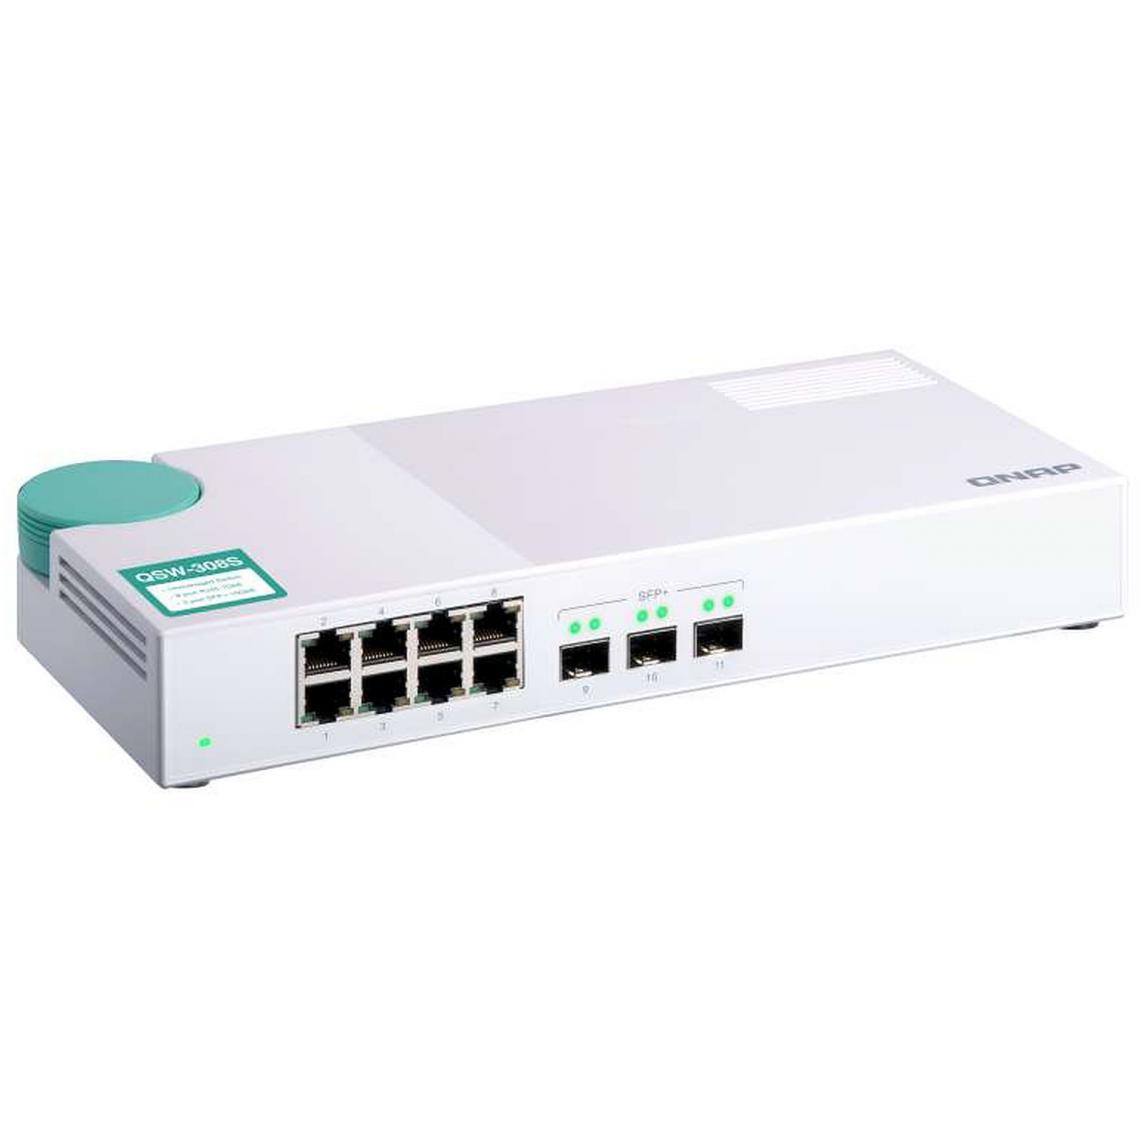 Qnap - QSW-308S- switch - NAS